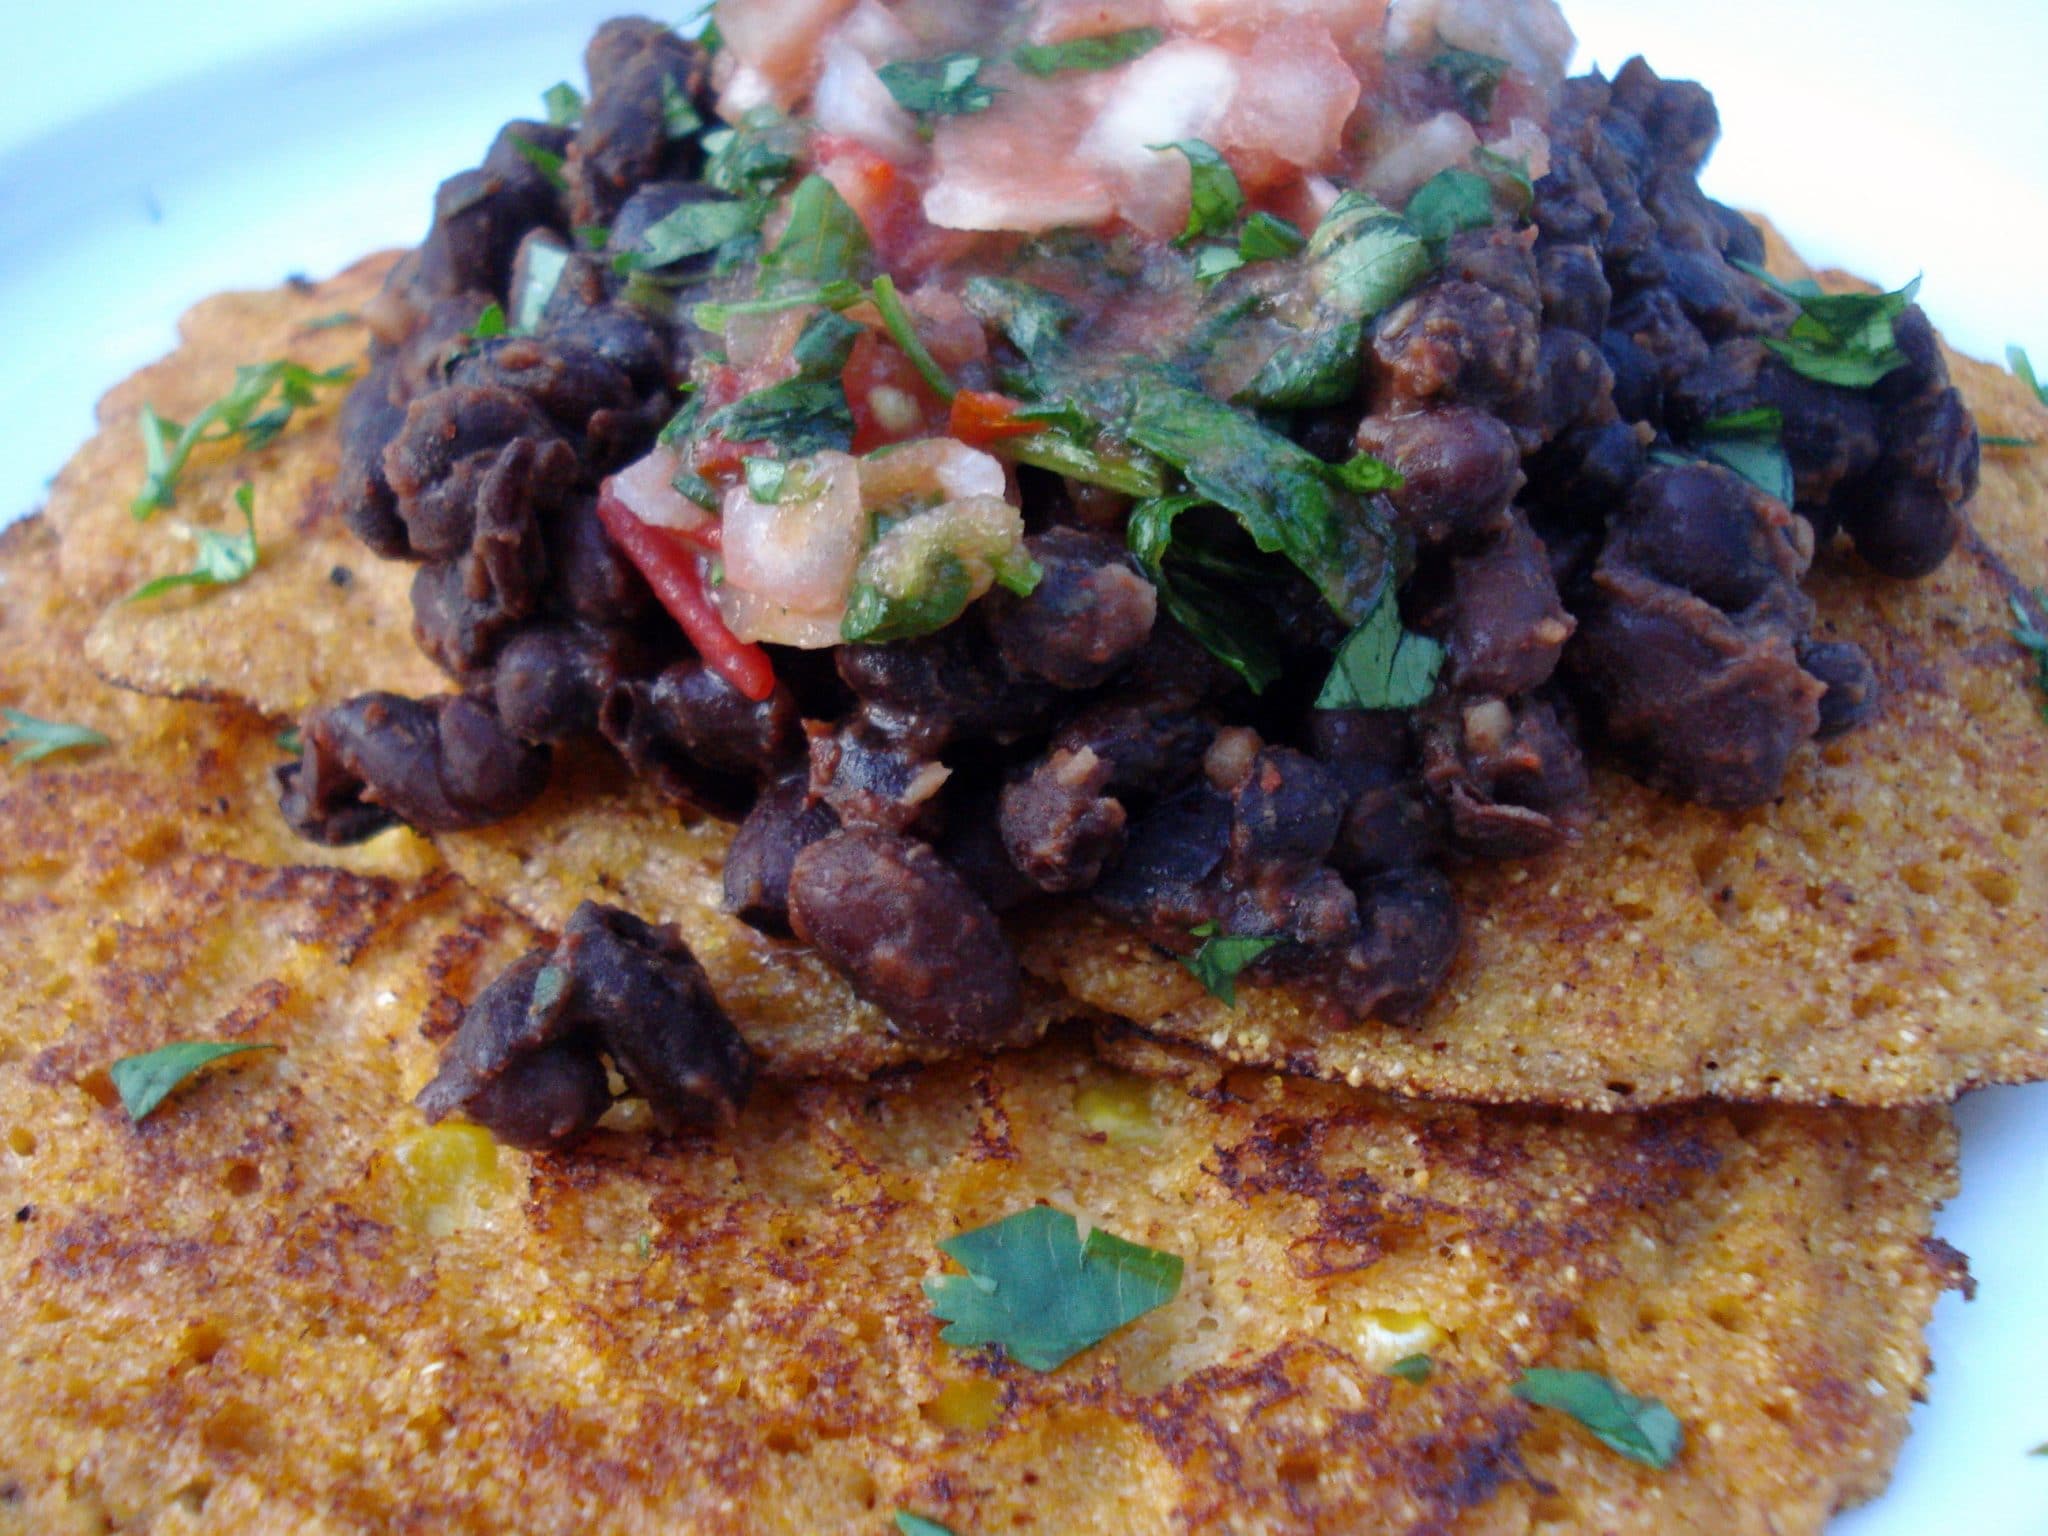 Corn cakes topped with black beans